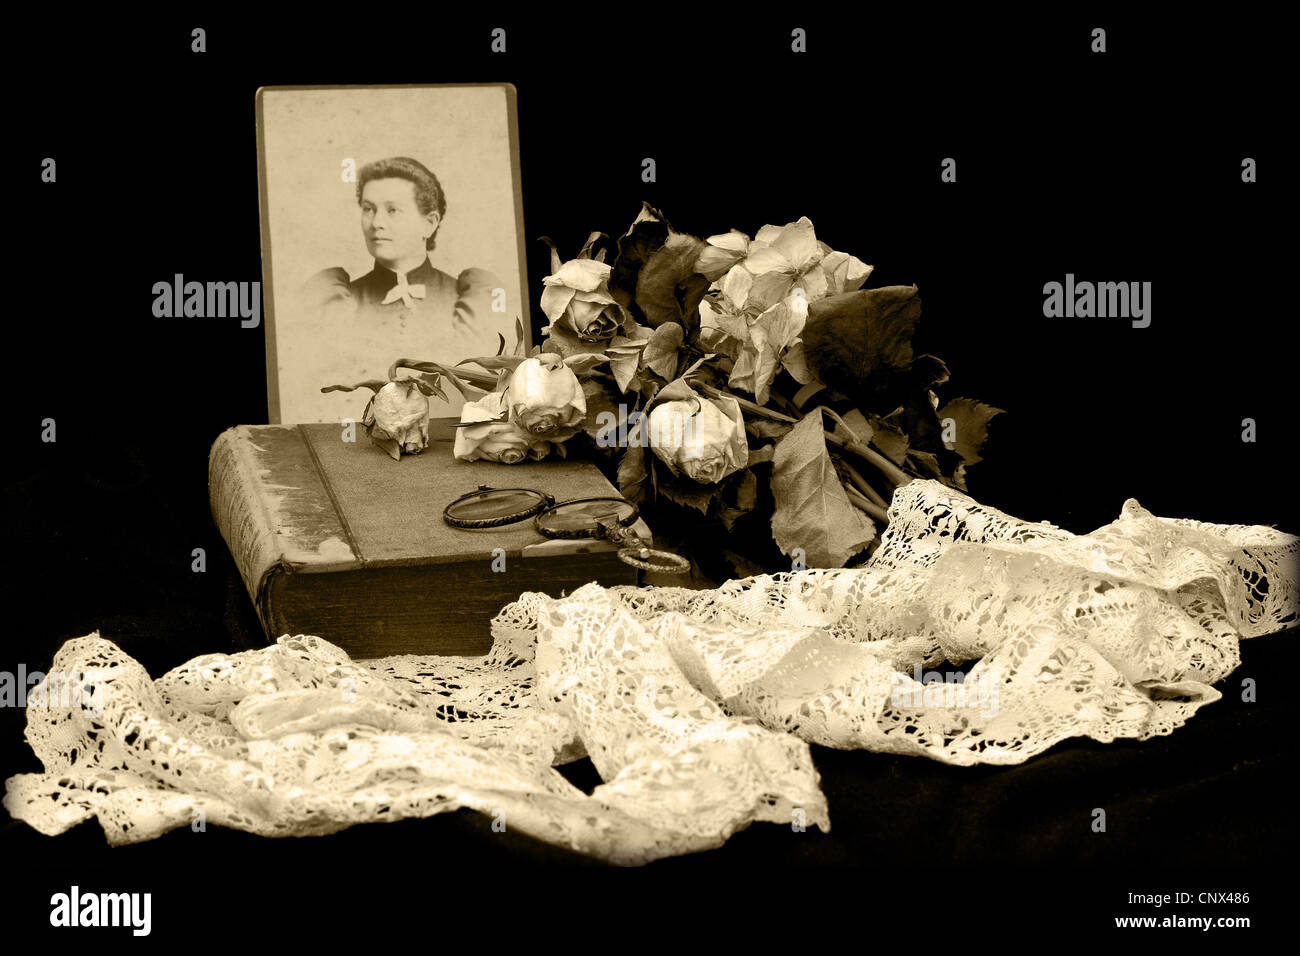 Victorian, sepia, 'in memoriam' image of a photograph of the deceased, flowers, bible and other items Stock Photo